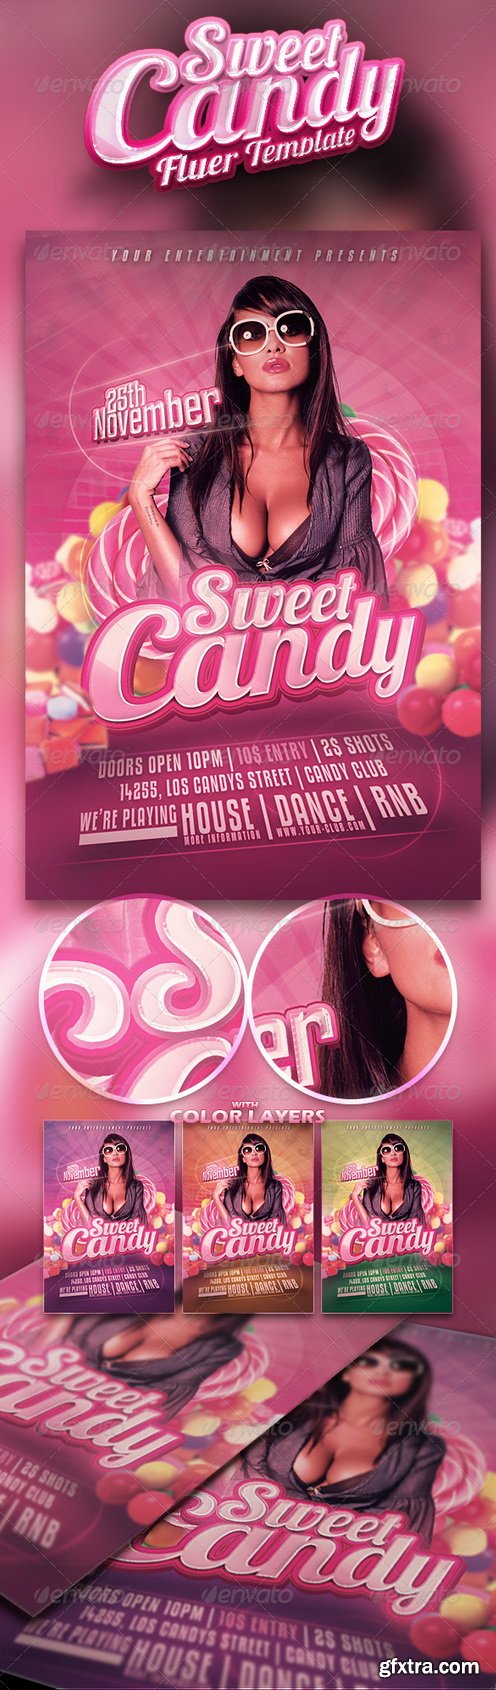 GraphicRiver - Sweet Candy Flyer Vol. 3 3455304